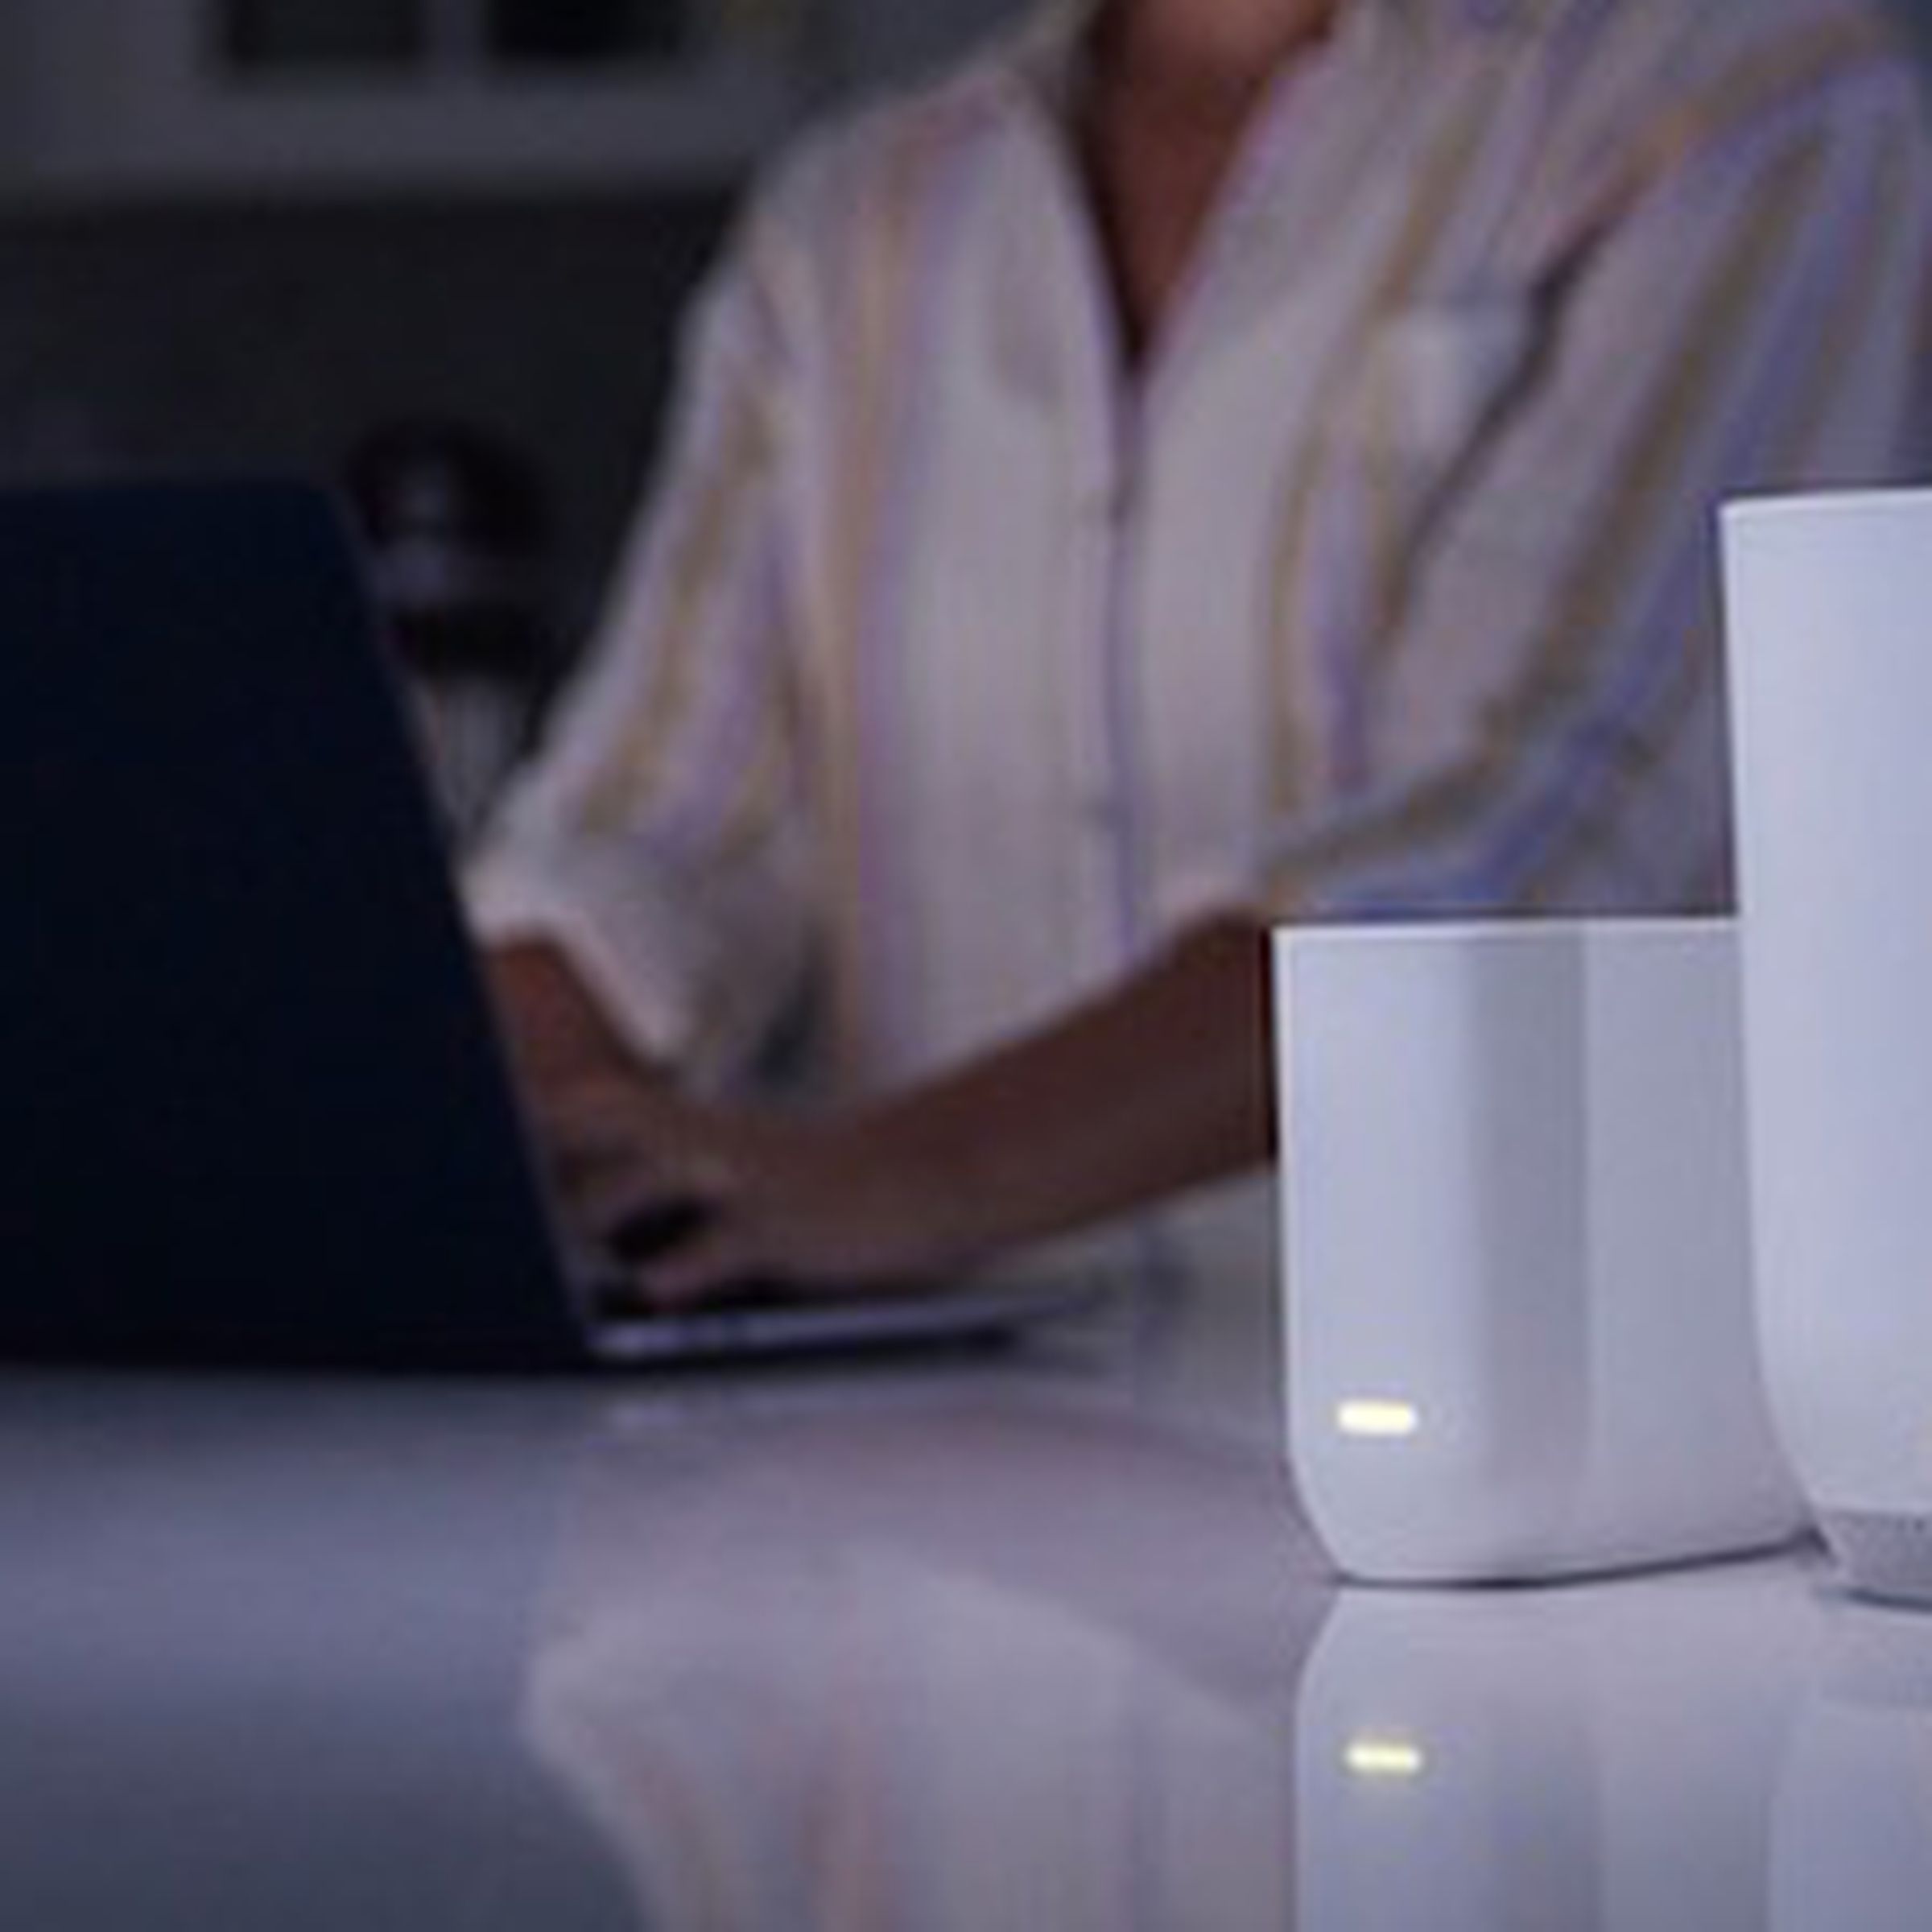 The Xfinity Storm-Ready WiFi on a table in a dark kitchen.